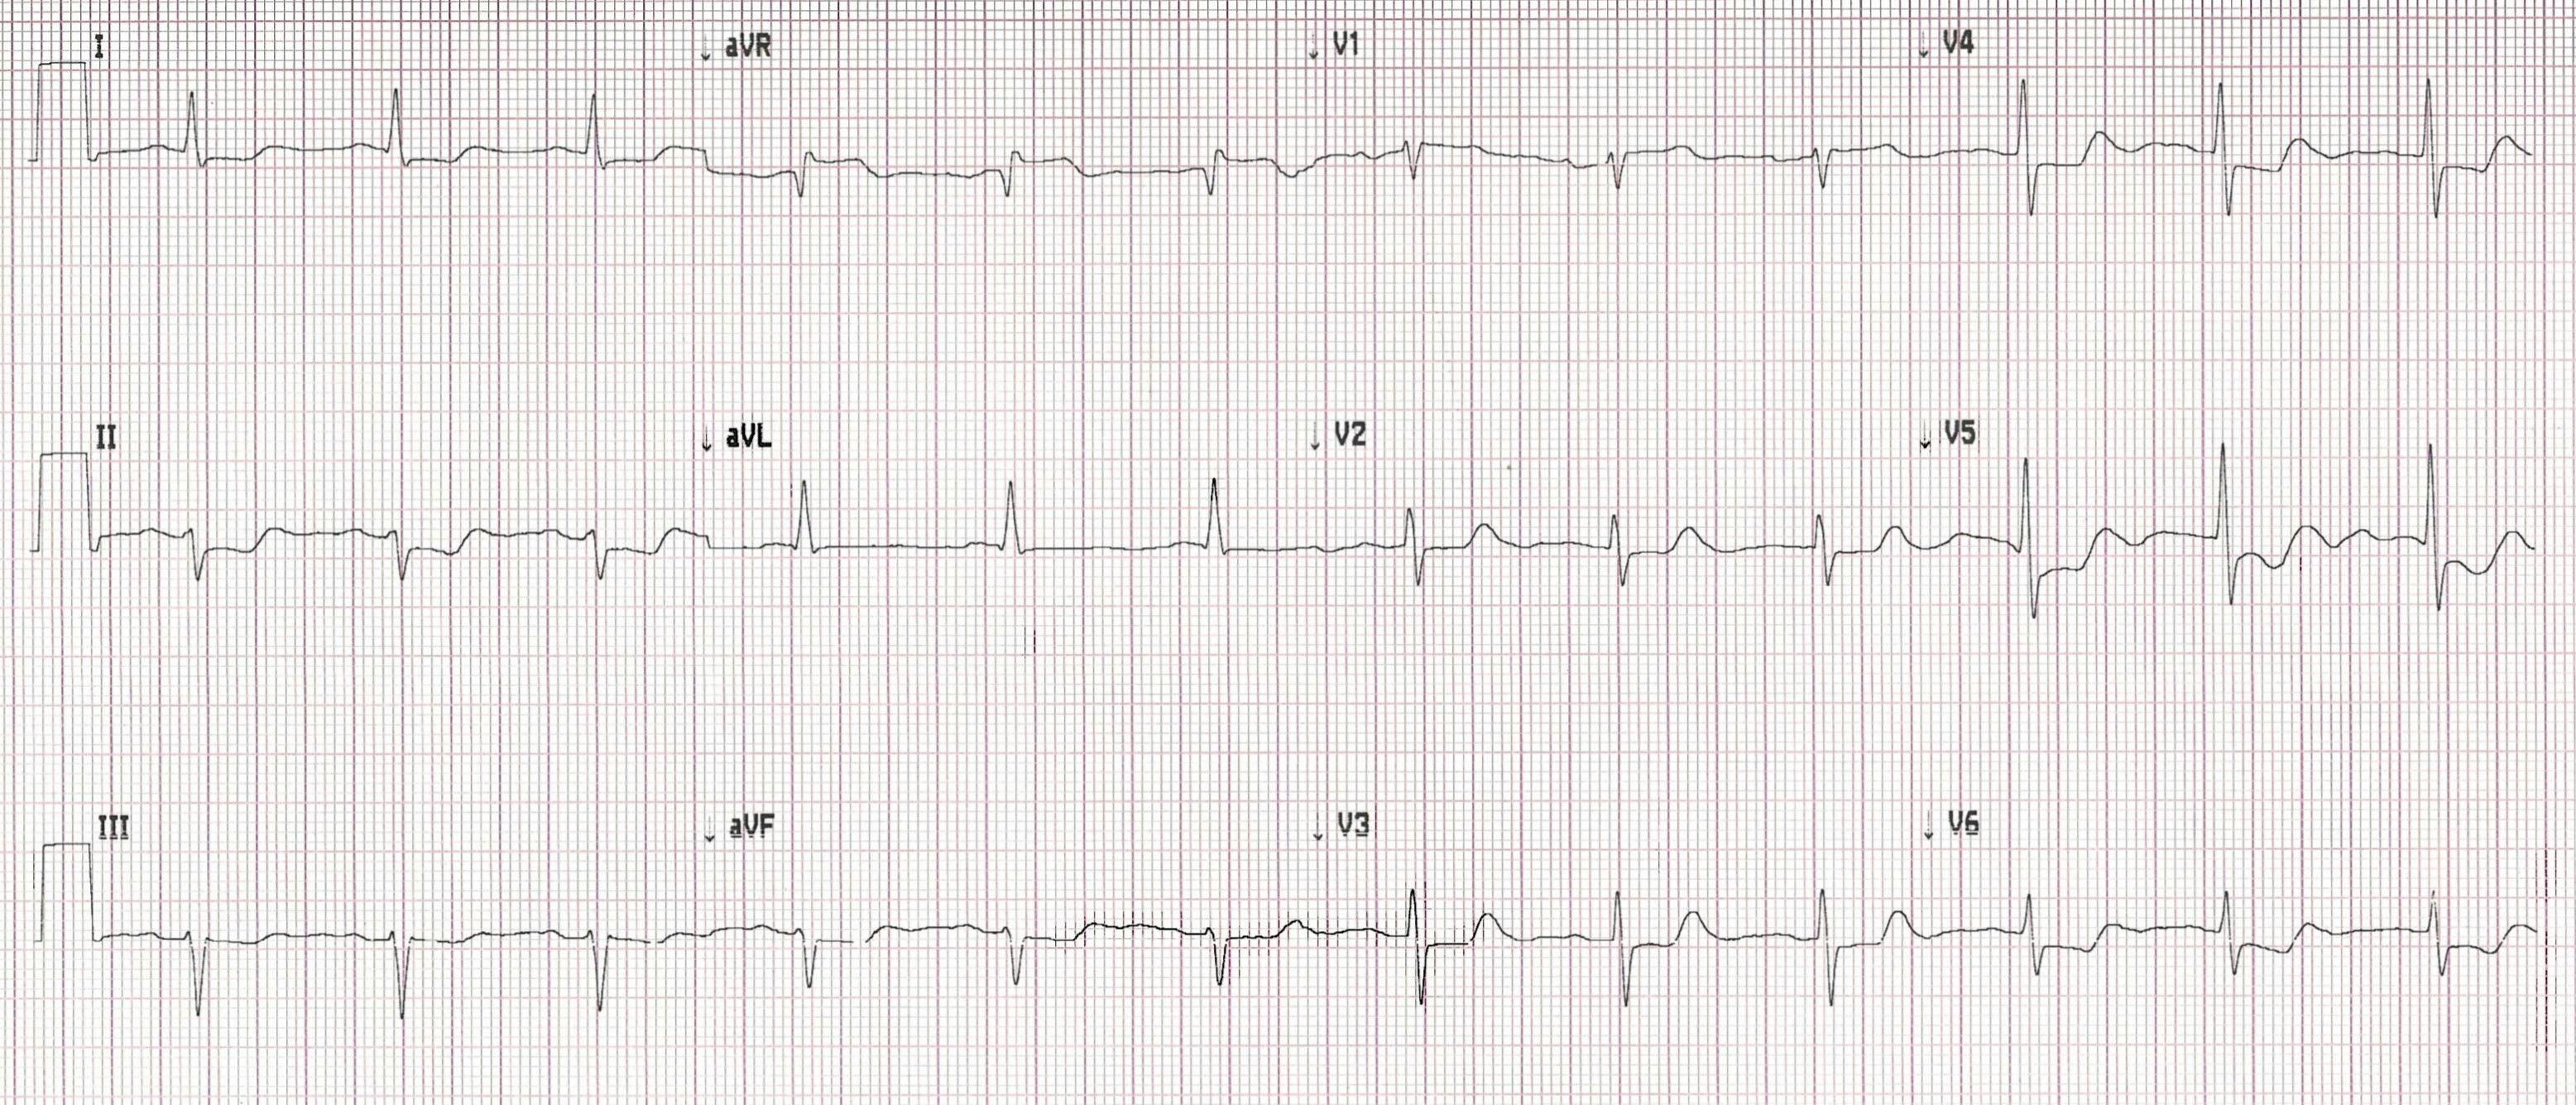 Printout of an ECG from patient featured in case report.